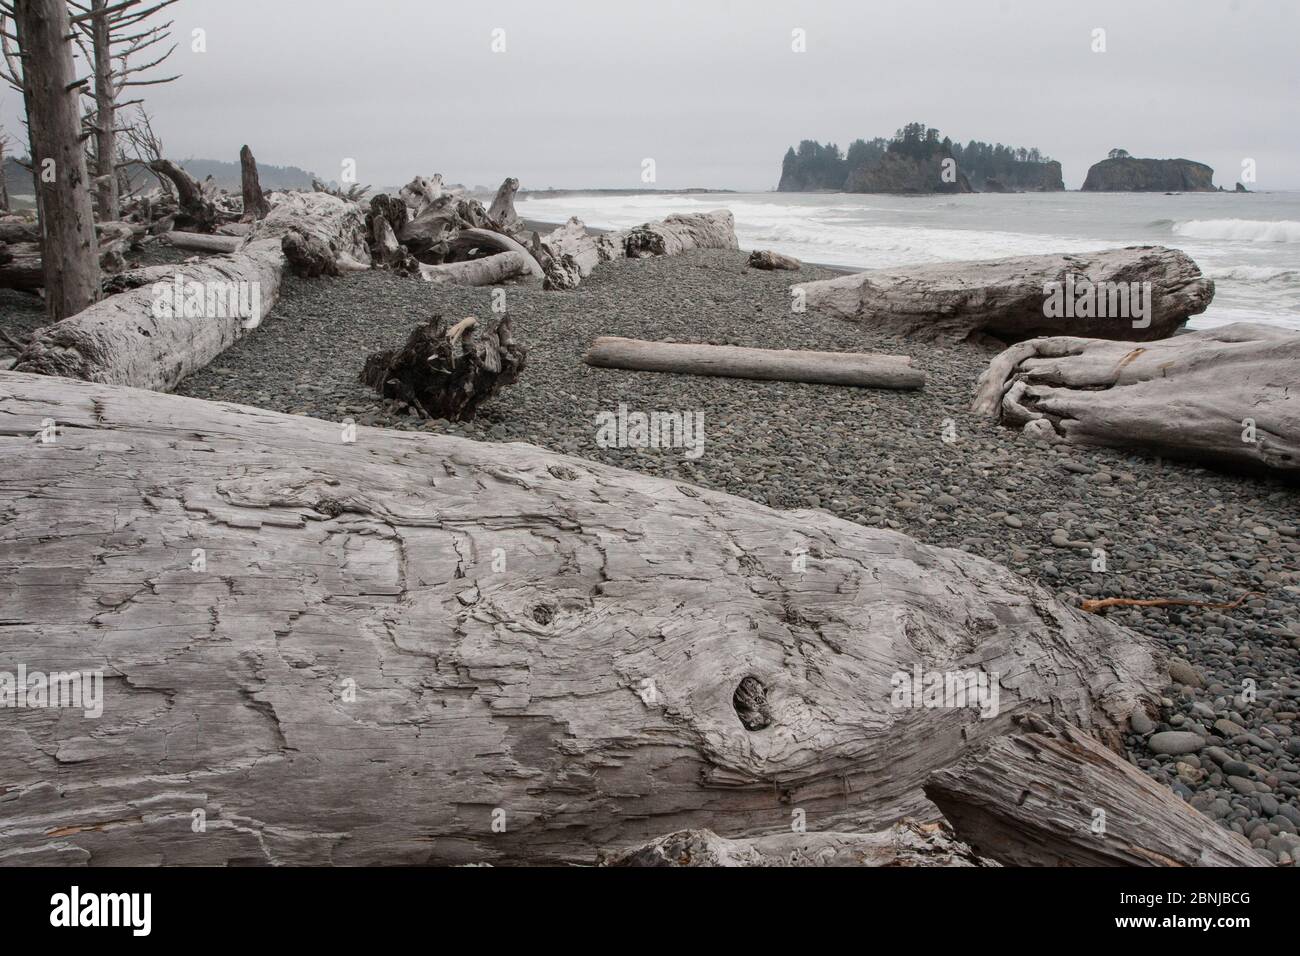 Driftwood logs, Pacific coast beach, Olympic National Park, UNESCO World Heritage Site, Washington State, United States of America, North America Stock Photo